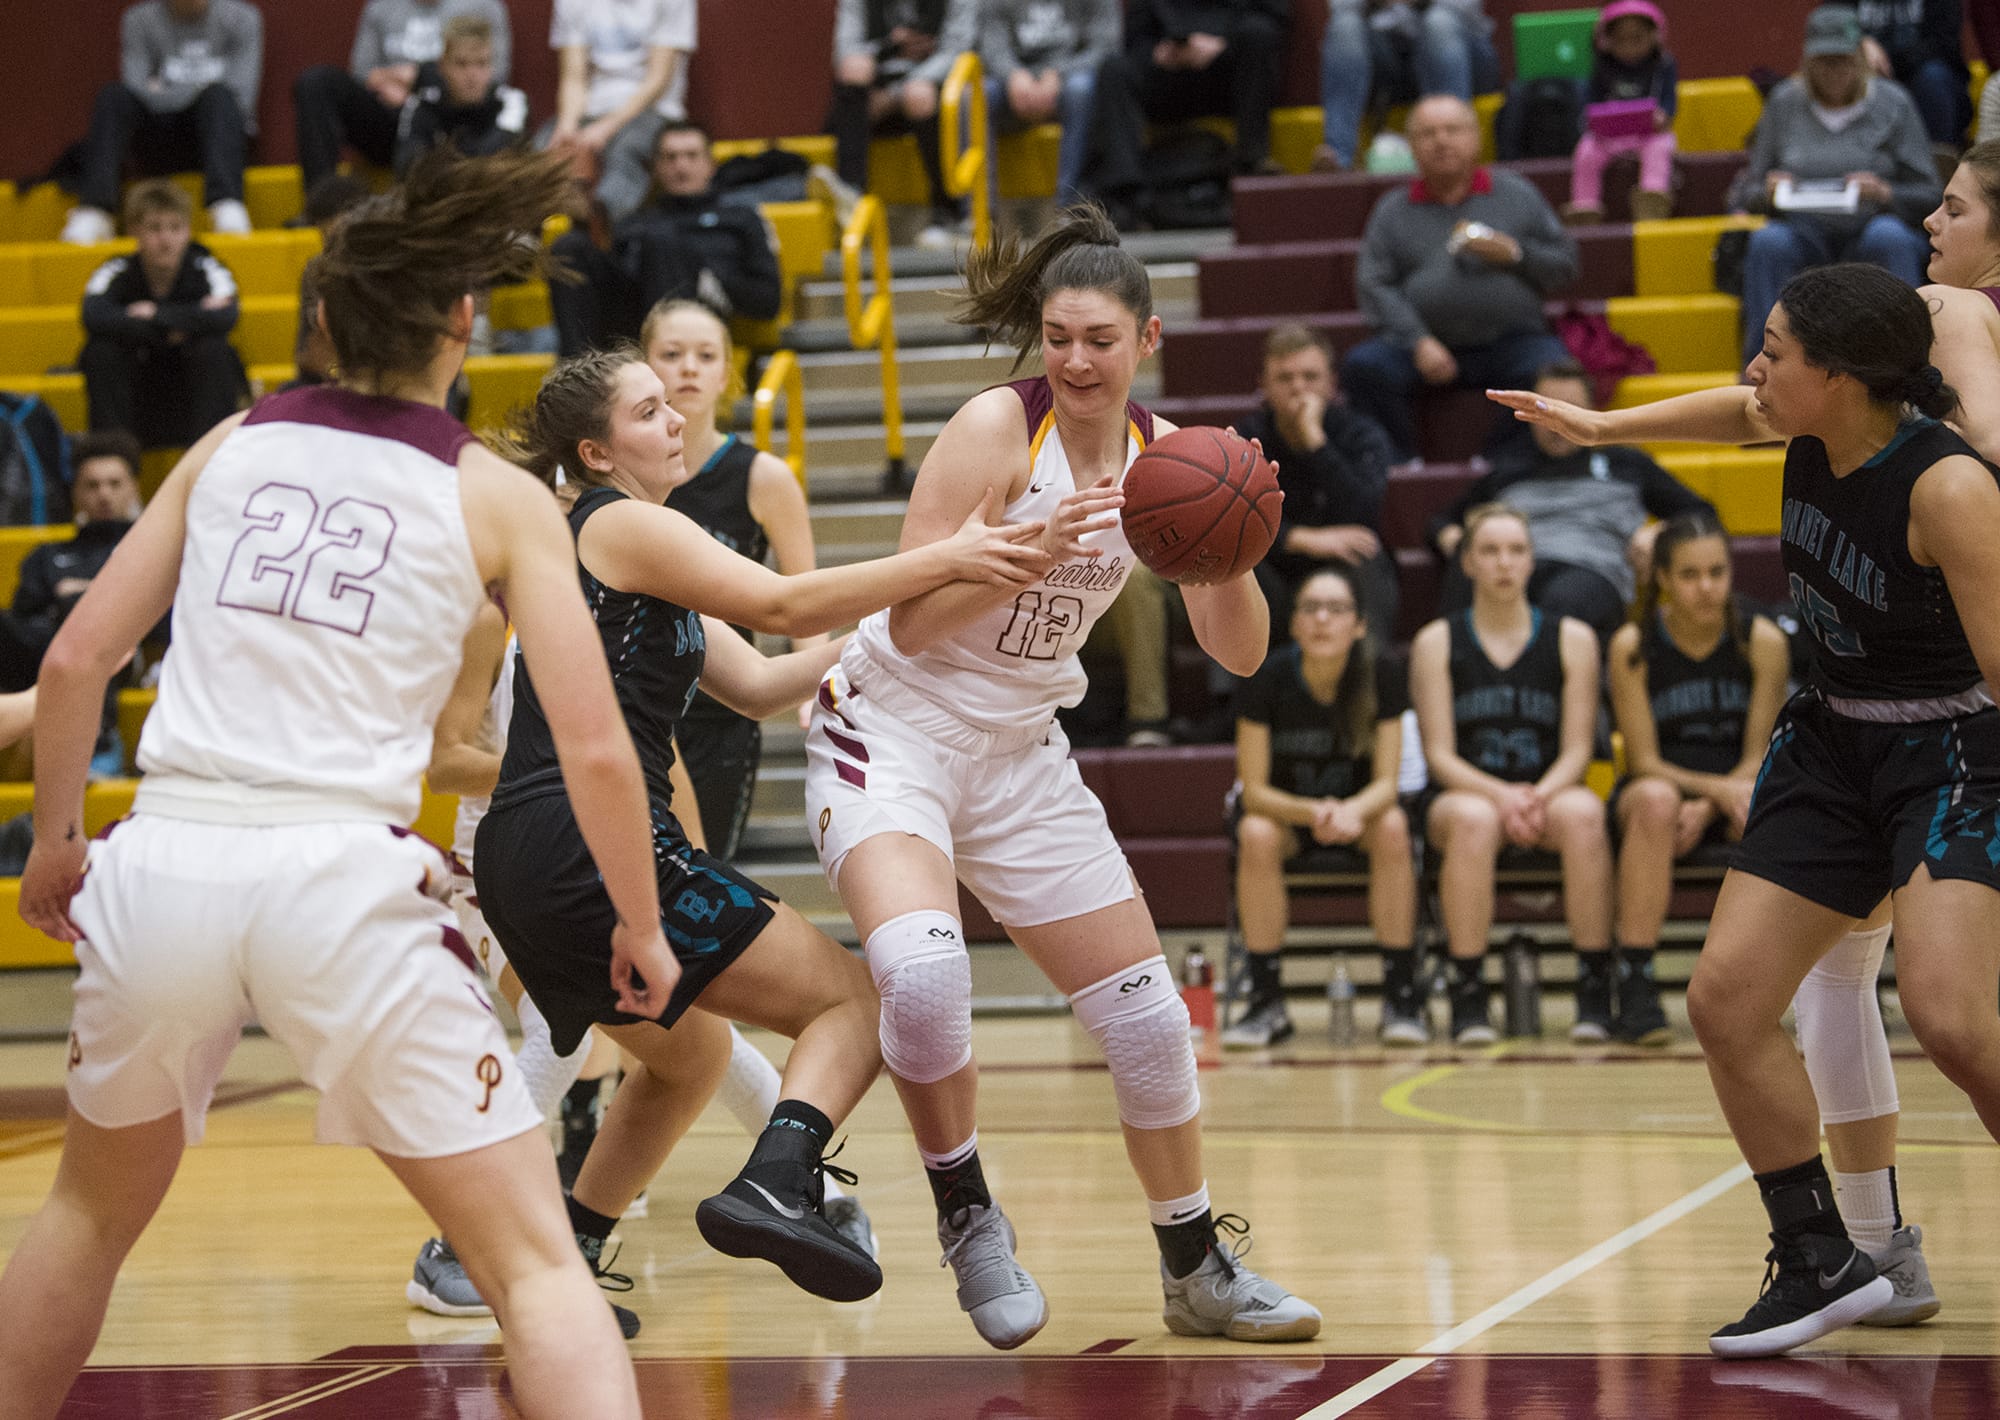 Prairie’s Brooke Walling (12) guards against Bonney Lake’s Olivia Grob (10) during the first round of the 3A bi-district girls basketball tournament at Prairie High School, Wednesday February 7, 2018.